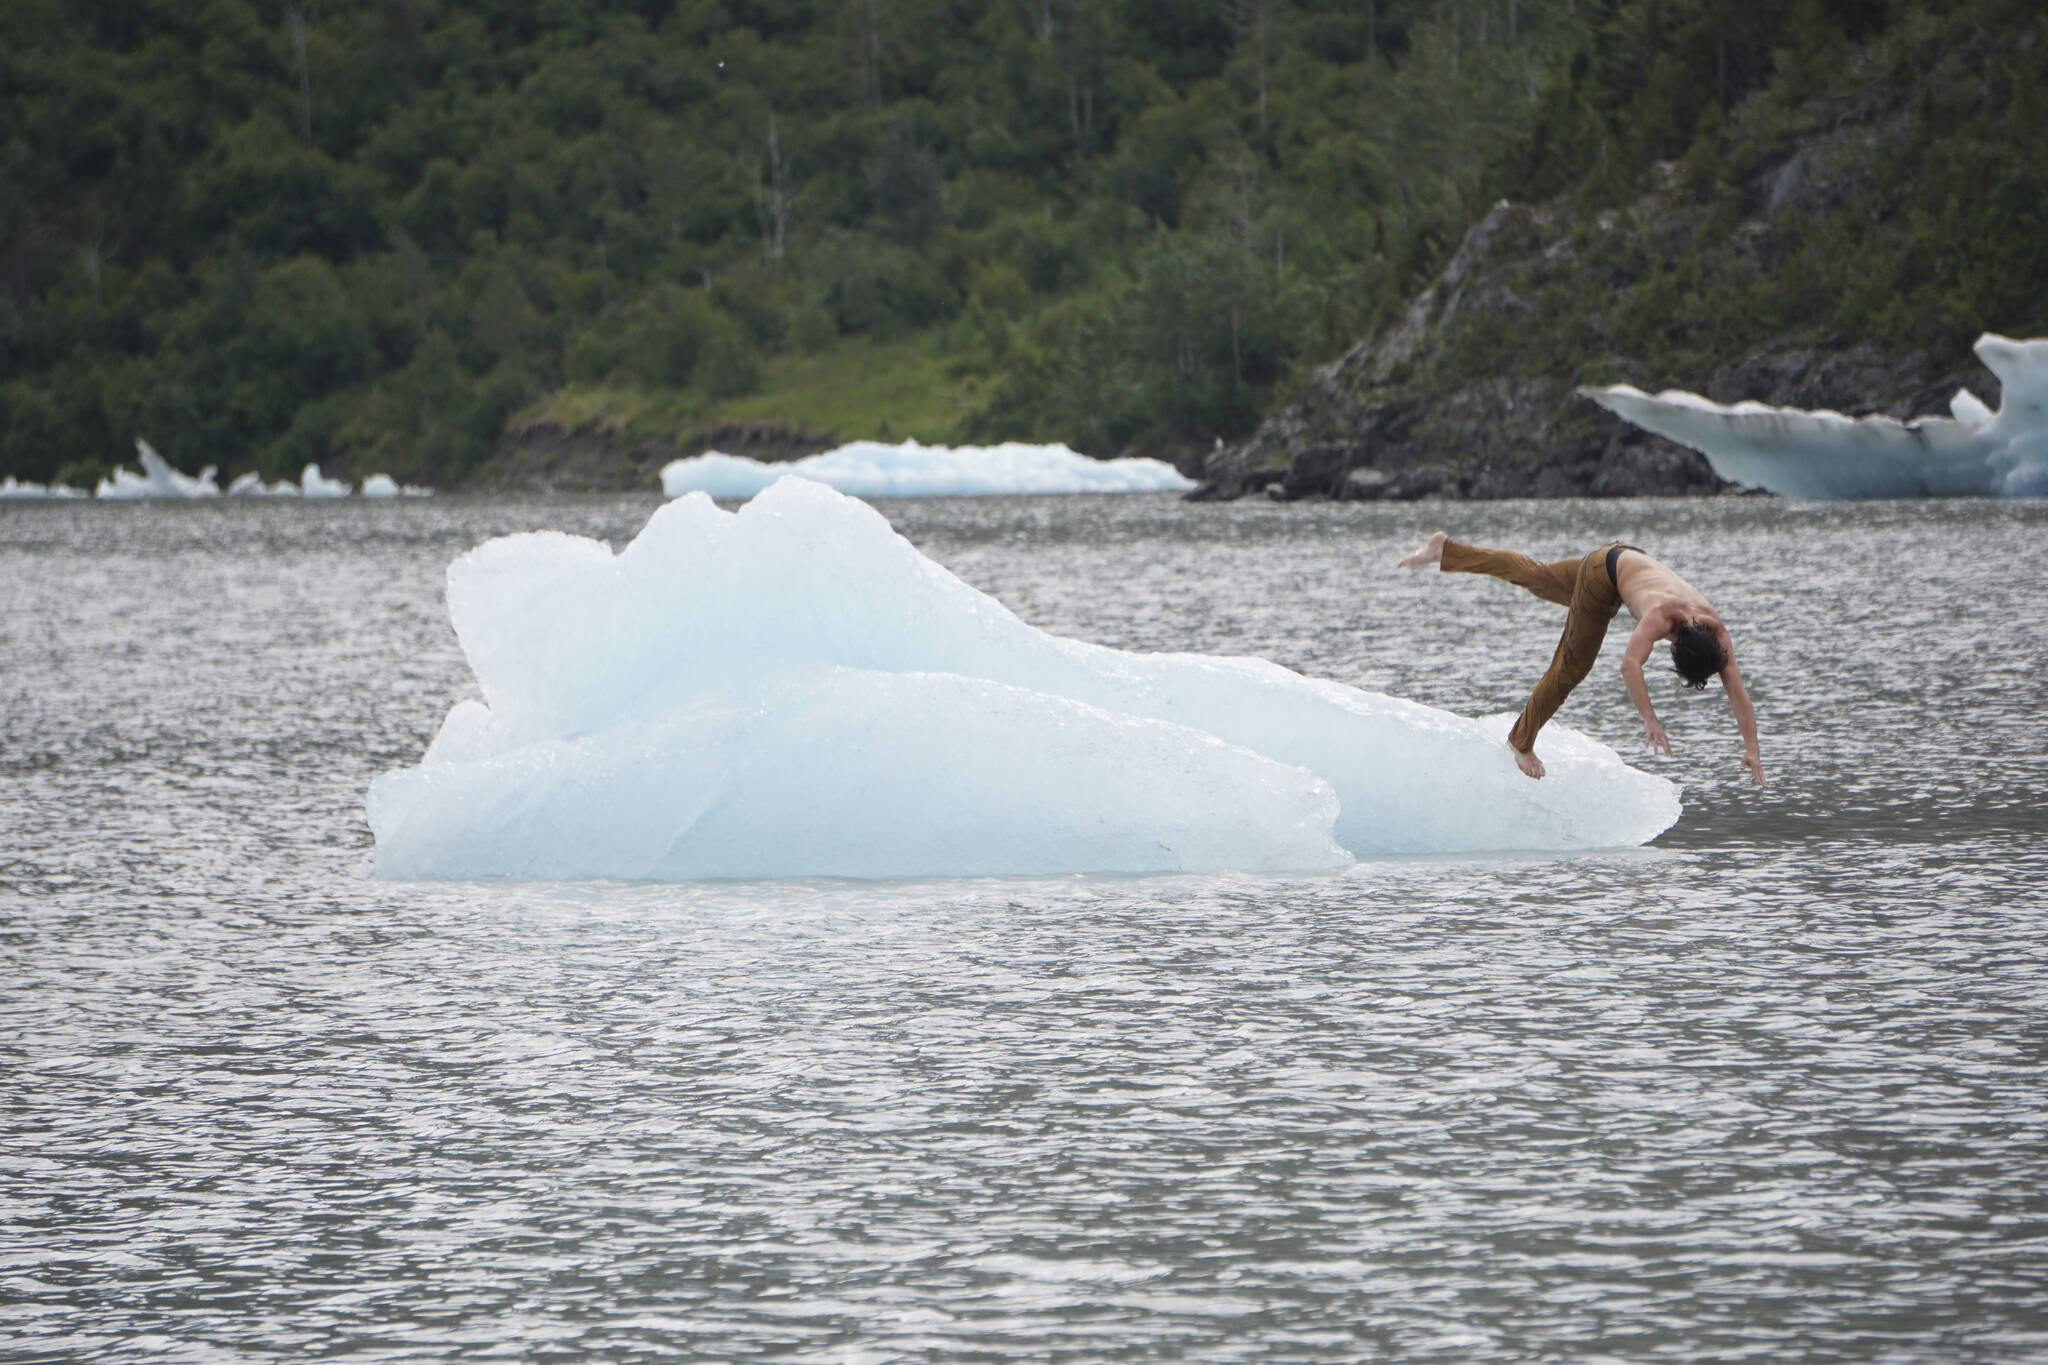 A man dives off an iceberg in Grewingk Glacier Lake on Monday, July 25, 2022, in Kachemak Bay State Park near Halibut Cove, Alaska. (Photo by Michael Armstrong/Homer News)